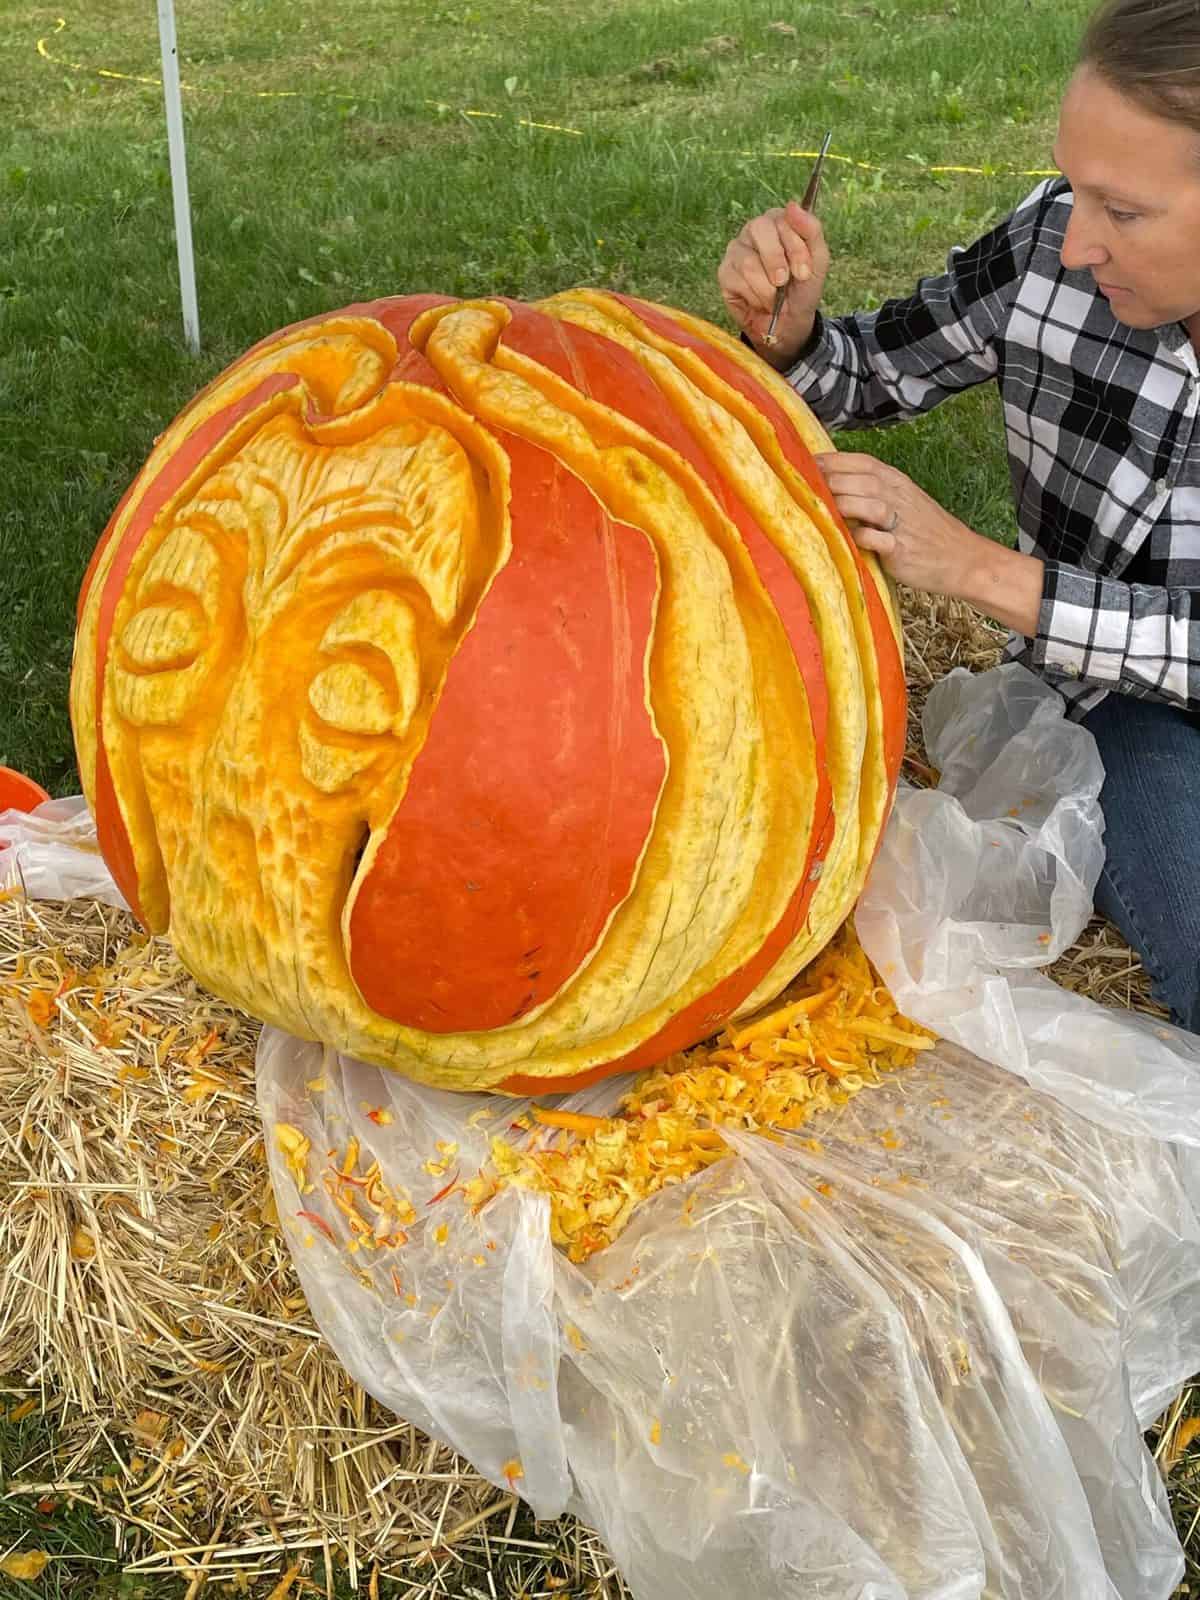 The Amazing Pumpkin Carve: The scary and the whimsical on display at drive-through exhibition in Titusville through Sunday